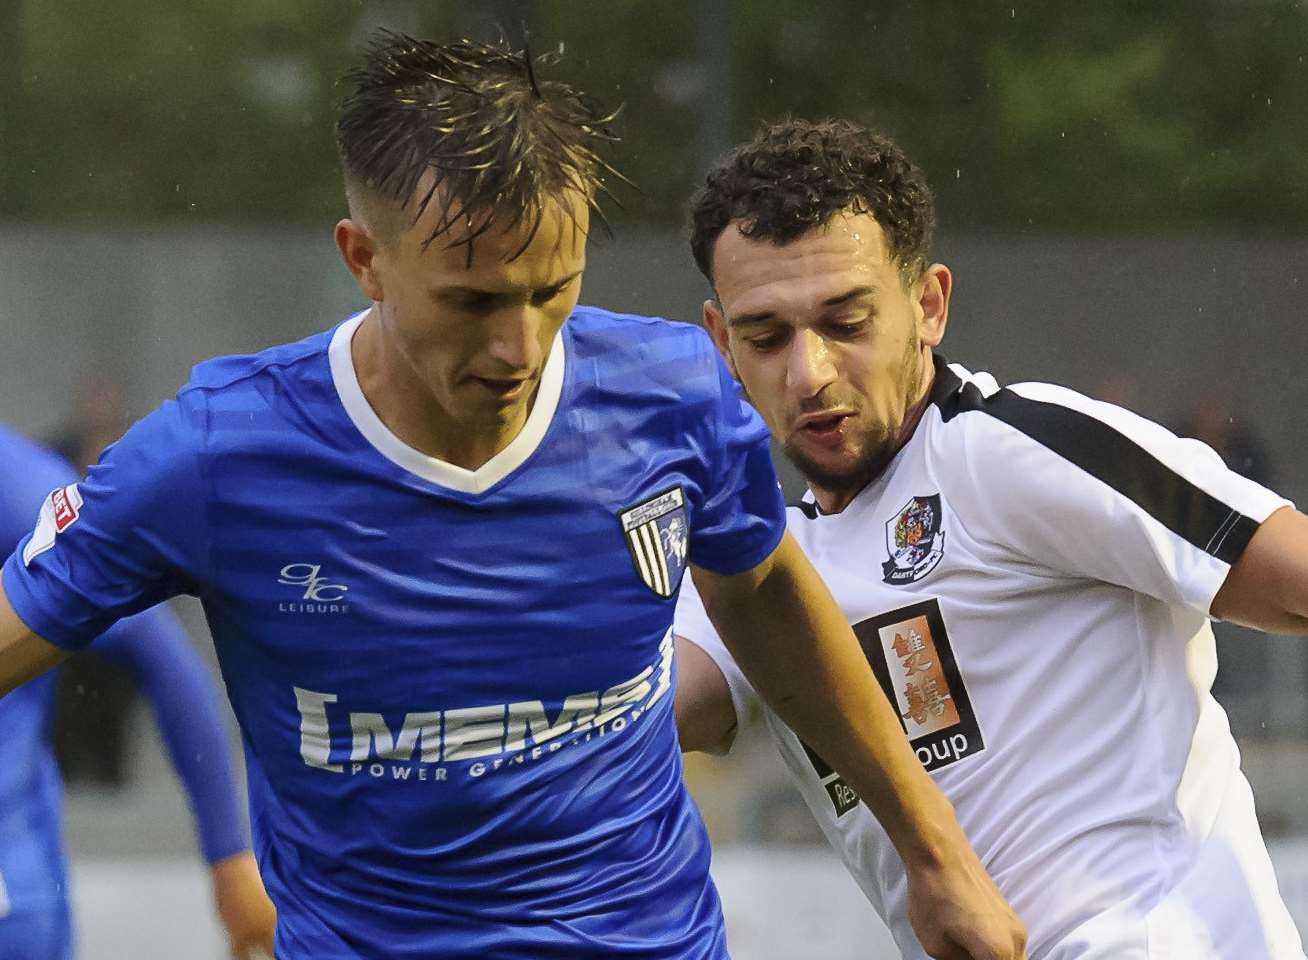 Ben Chapman could start for Gills against Phoenix Sports Picture: Andy Payton